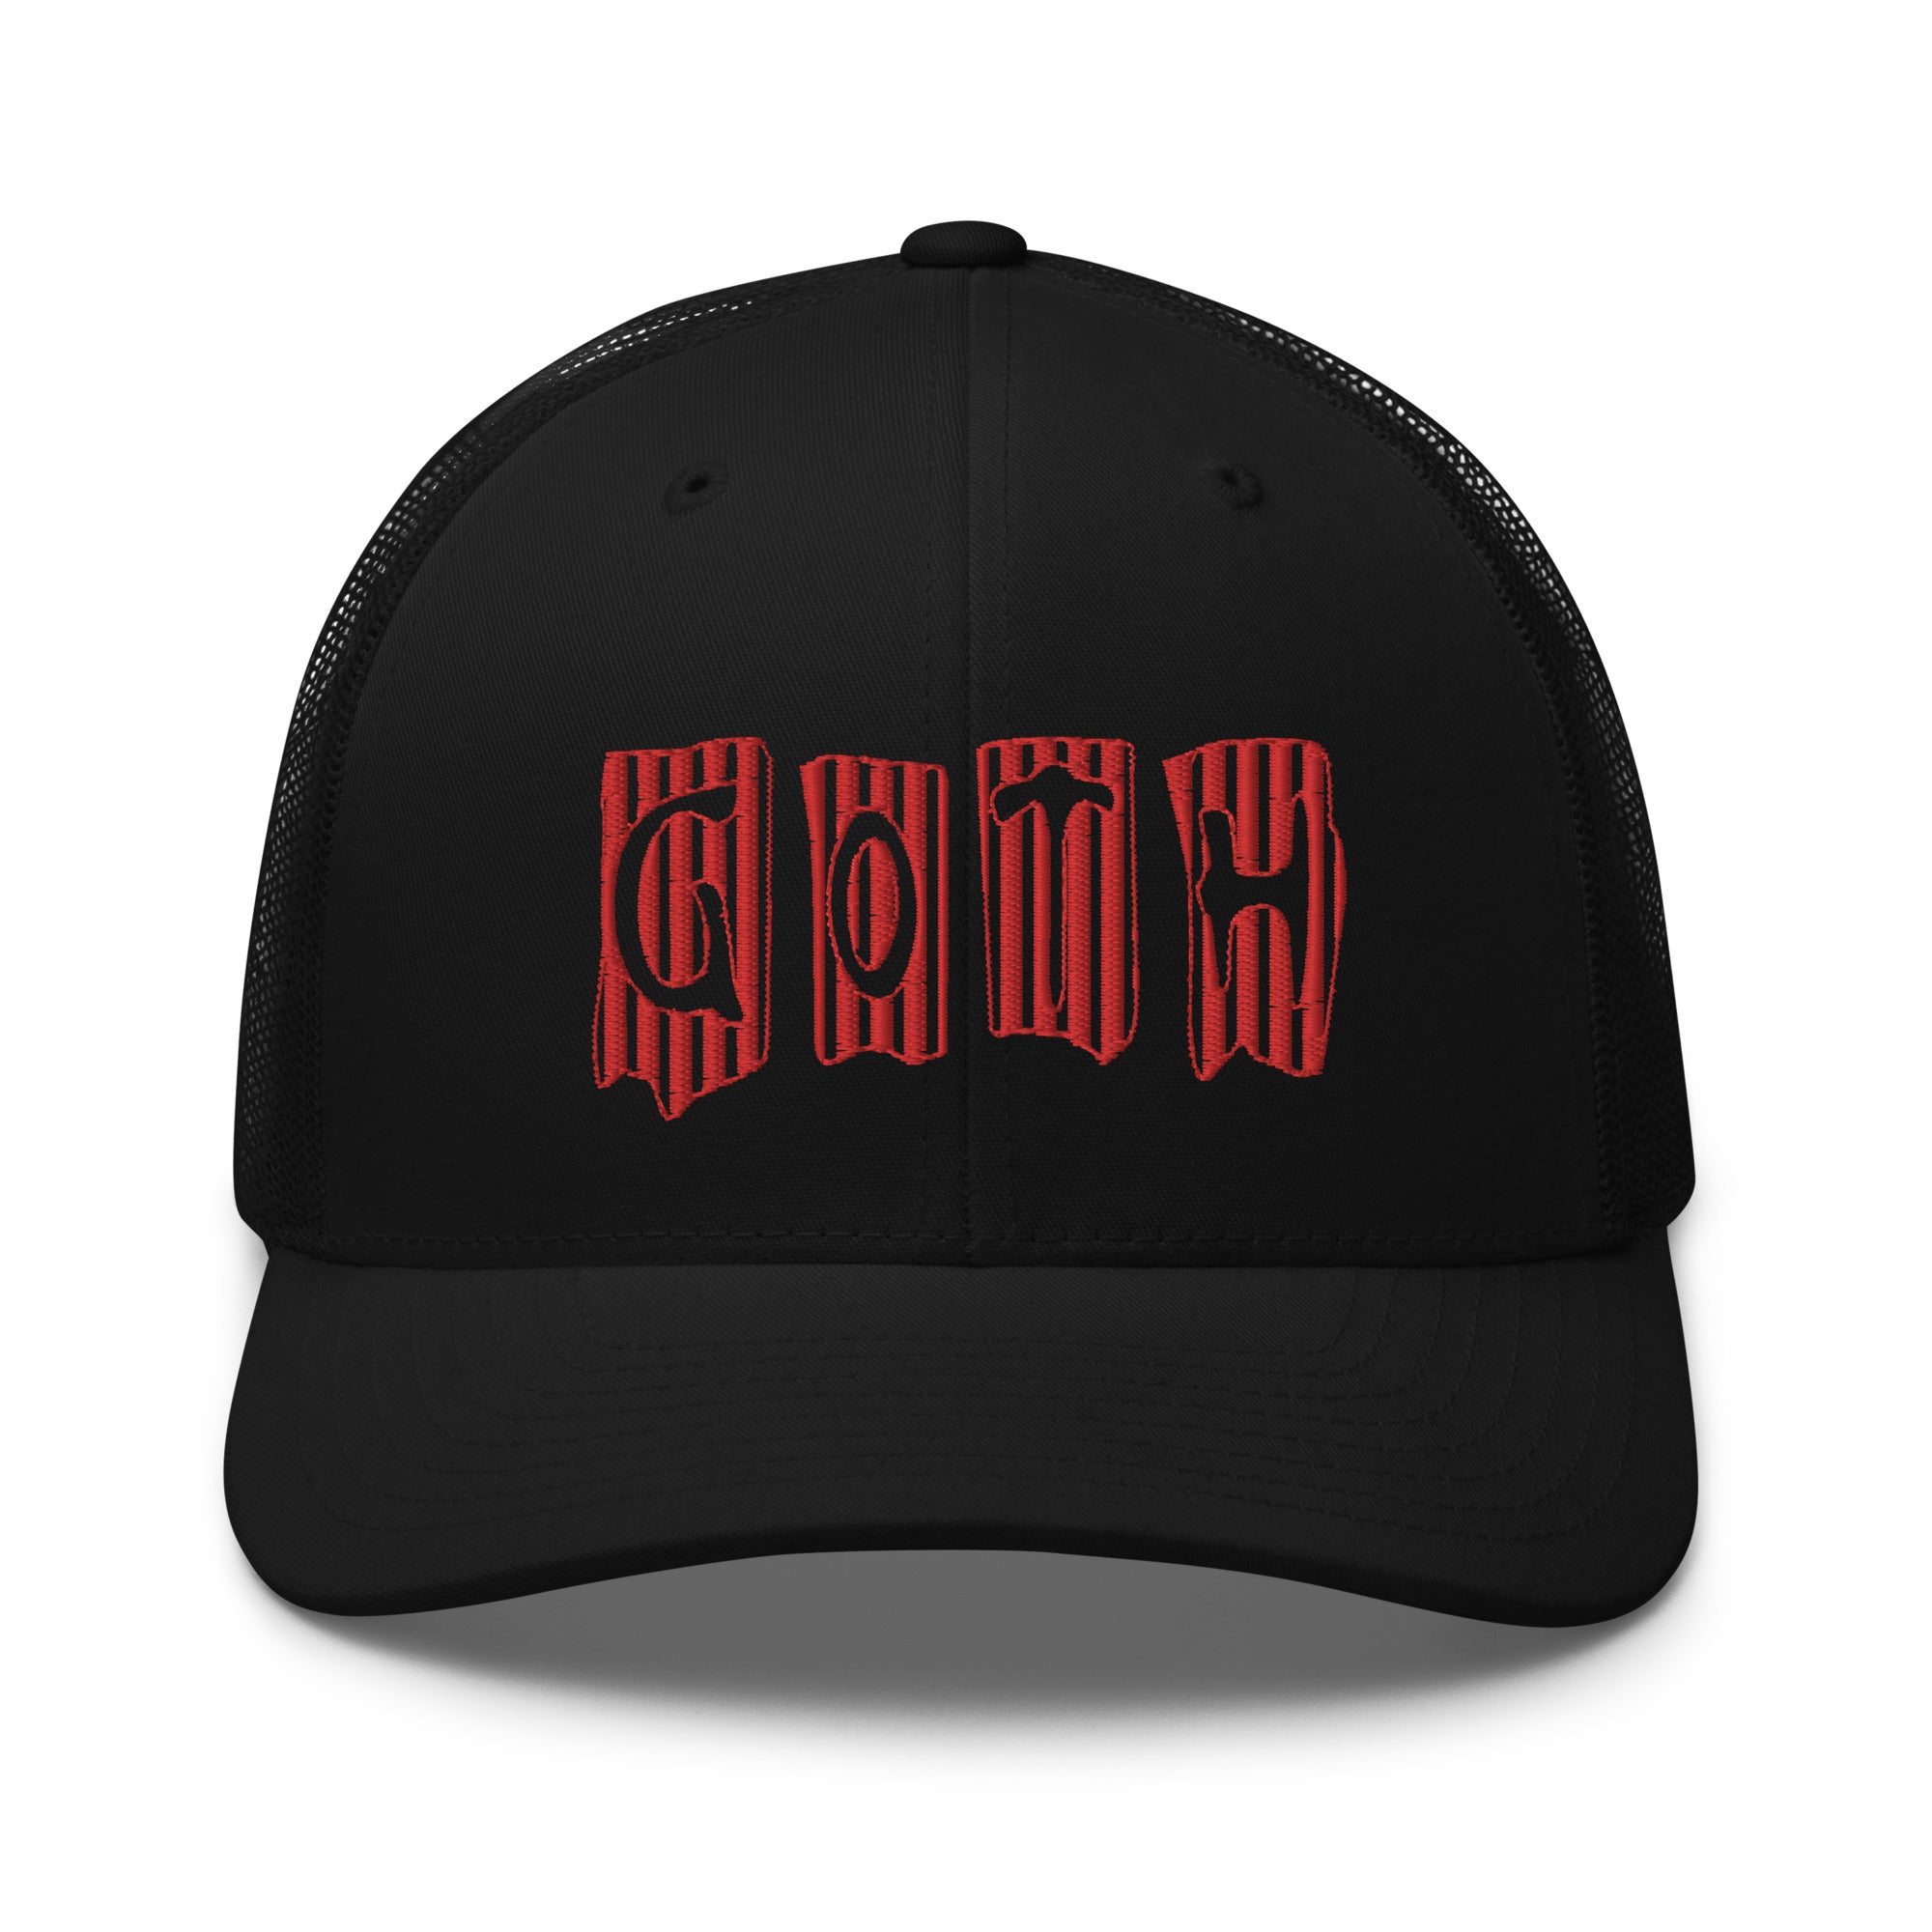 Red Vertical Stripe Goth Embroidered Trucker Cap Snapback Hat